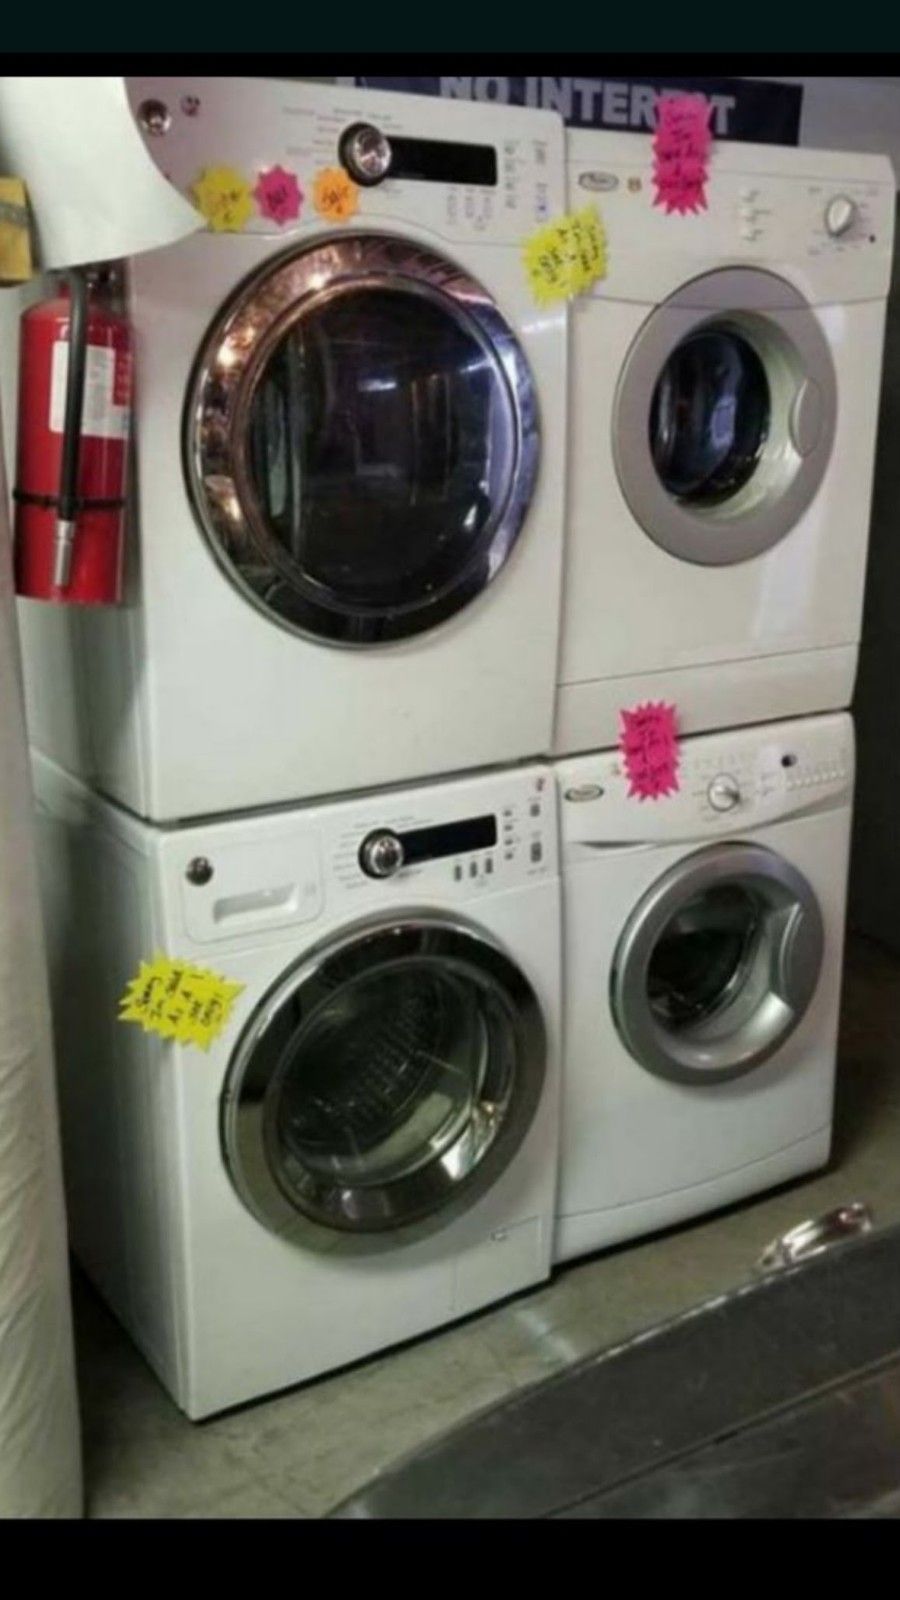 🌻🌸HUGE SALE. REFRIGERATOR*WASHER*DRYER*STOVE' *DISWASHER.90 DAY WARRANTY DELIVERY AVAILABLE+FINACIAL . PAY AS CASH 90 DAY🌻